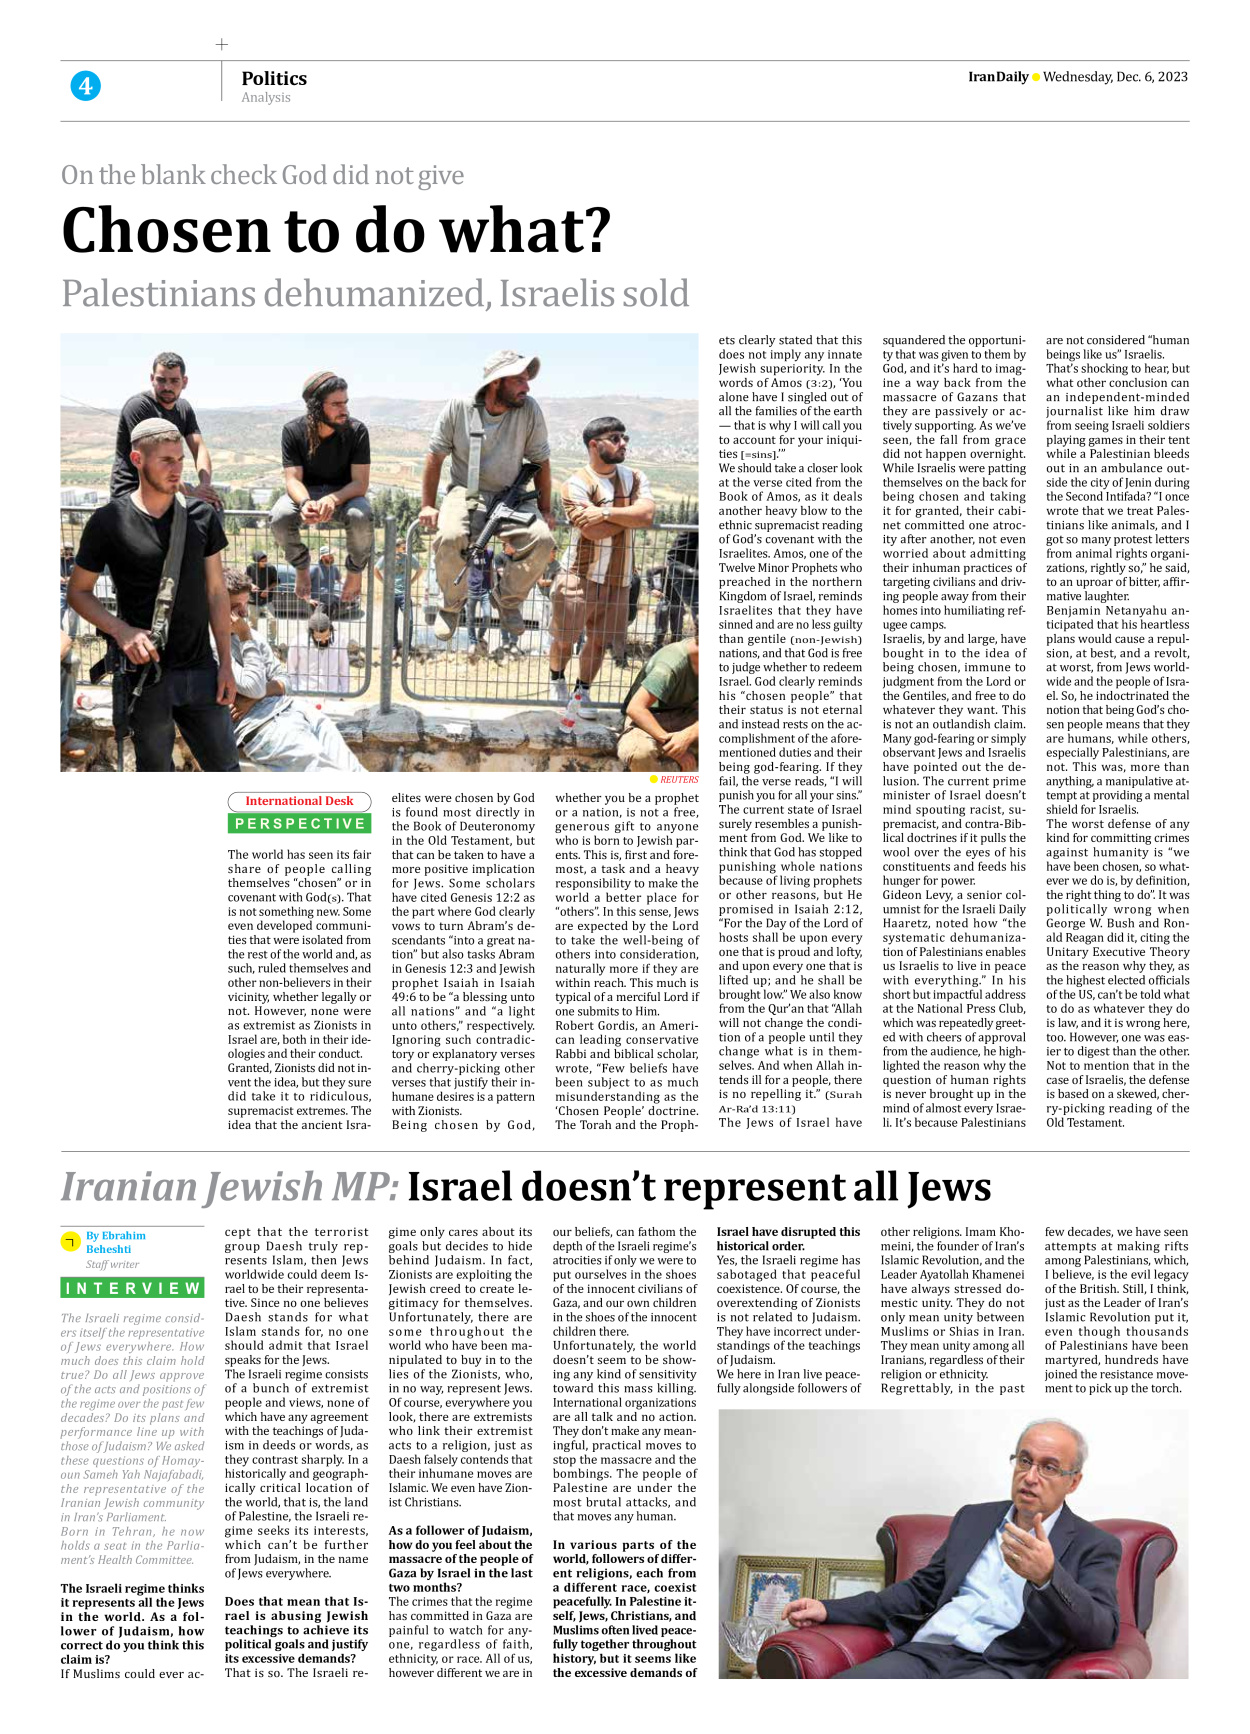 Iran Daily - Number Seven Thousand Four Hundred and Fifty Three - 06 December 2023 - Page 4